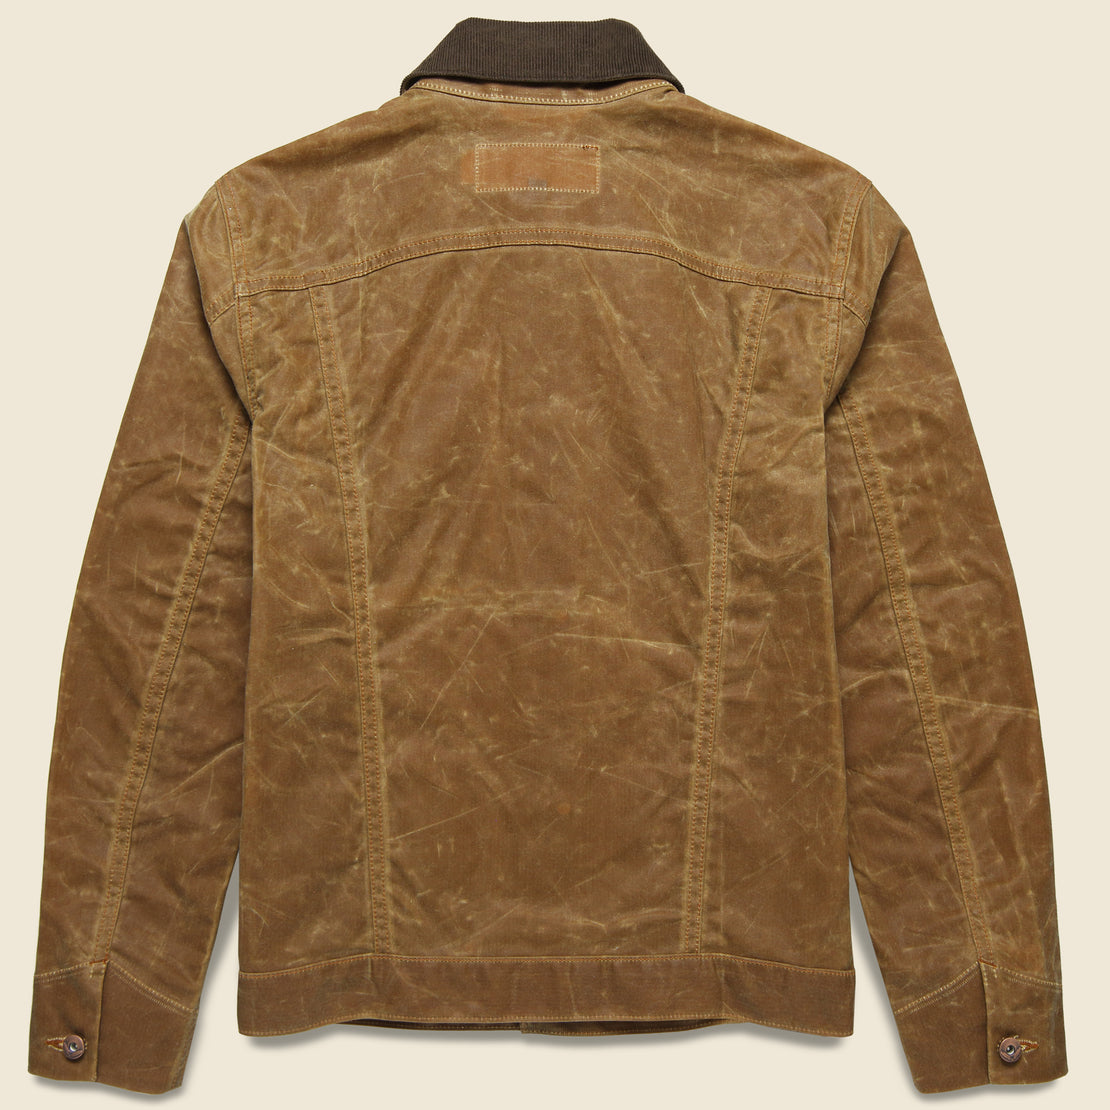 Cord Collar Supply Jacket - Whiskey - Rogue Territory - STAG Provisions - Outerwear - Coat / Jacket